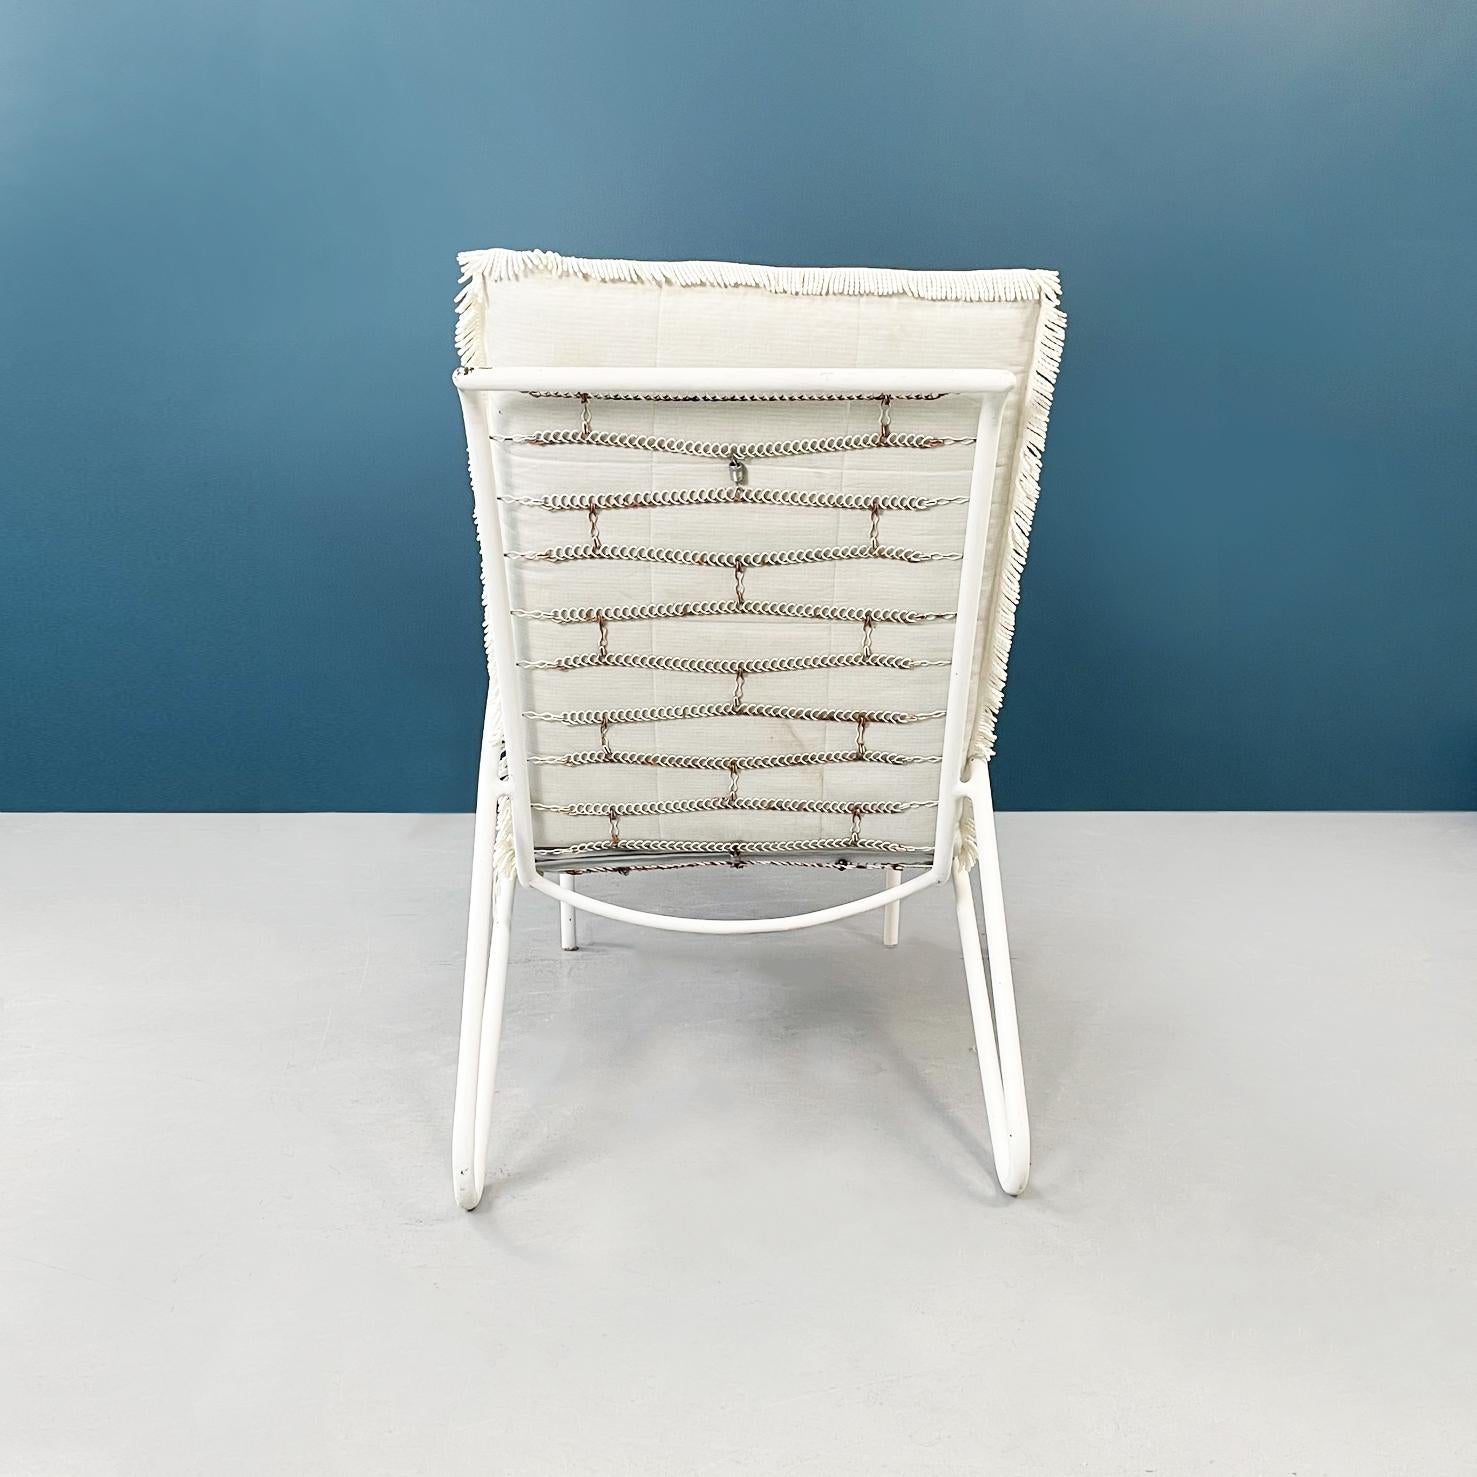 Mid-20th Century Italian Mid-Century White Iron Garden Armchairs with Fabric Cushions, 1960s For Sale